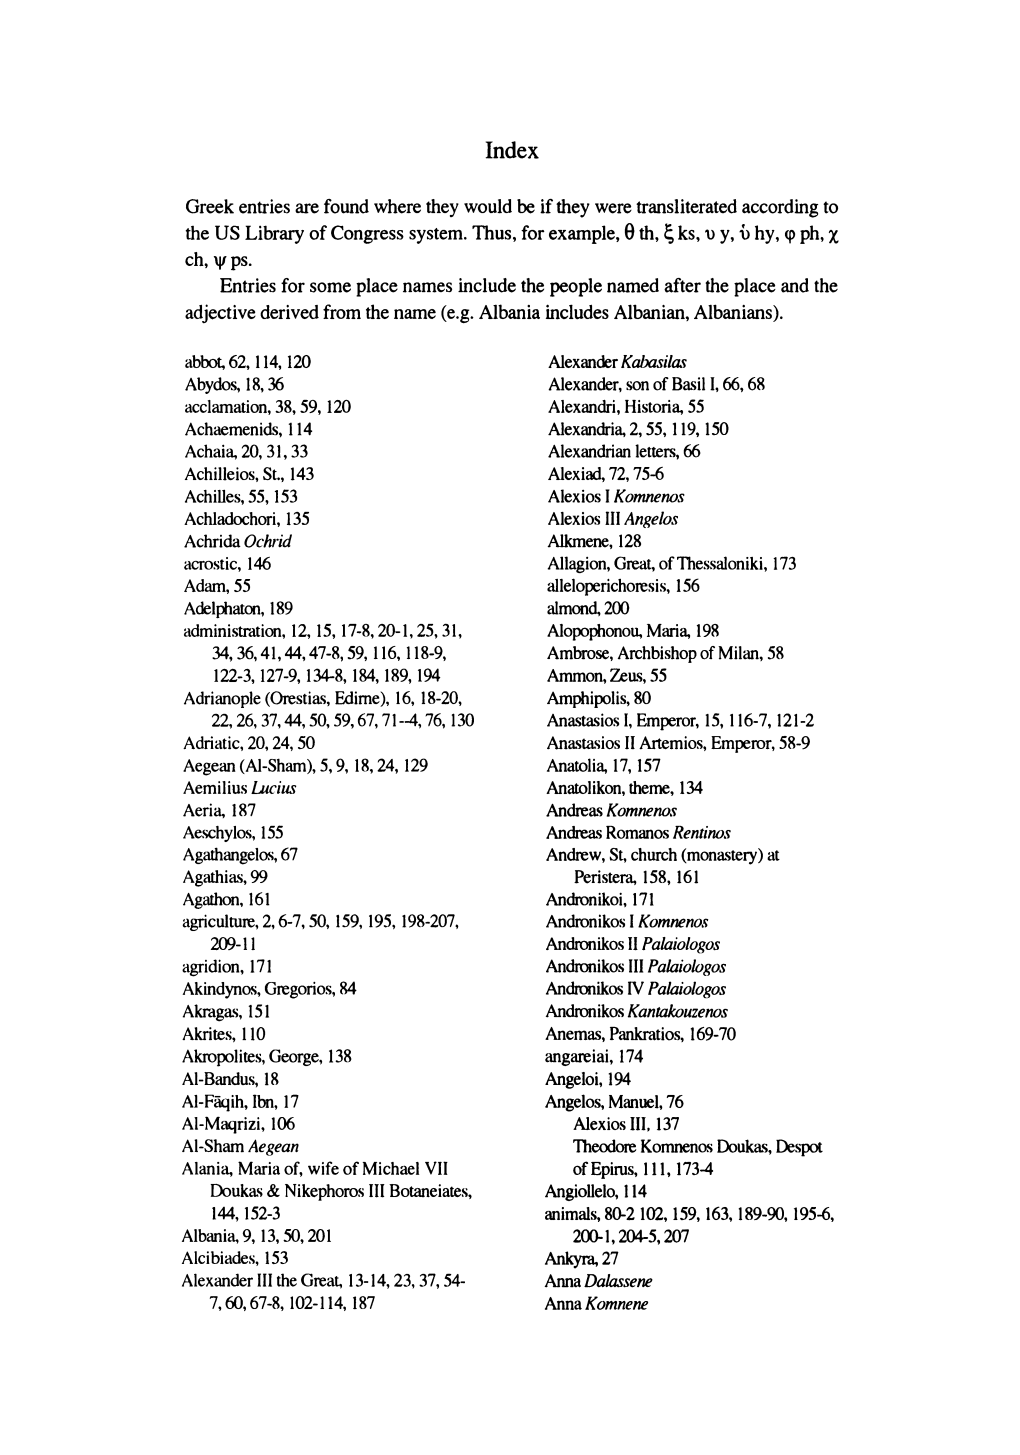 Greek Entries Are Found Where They Would Be If They Were Transliterated According to the US Library of Congress System